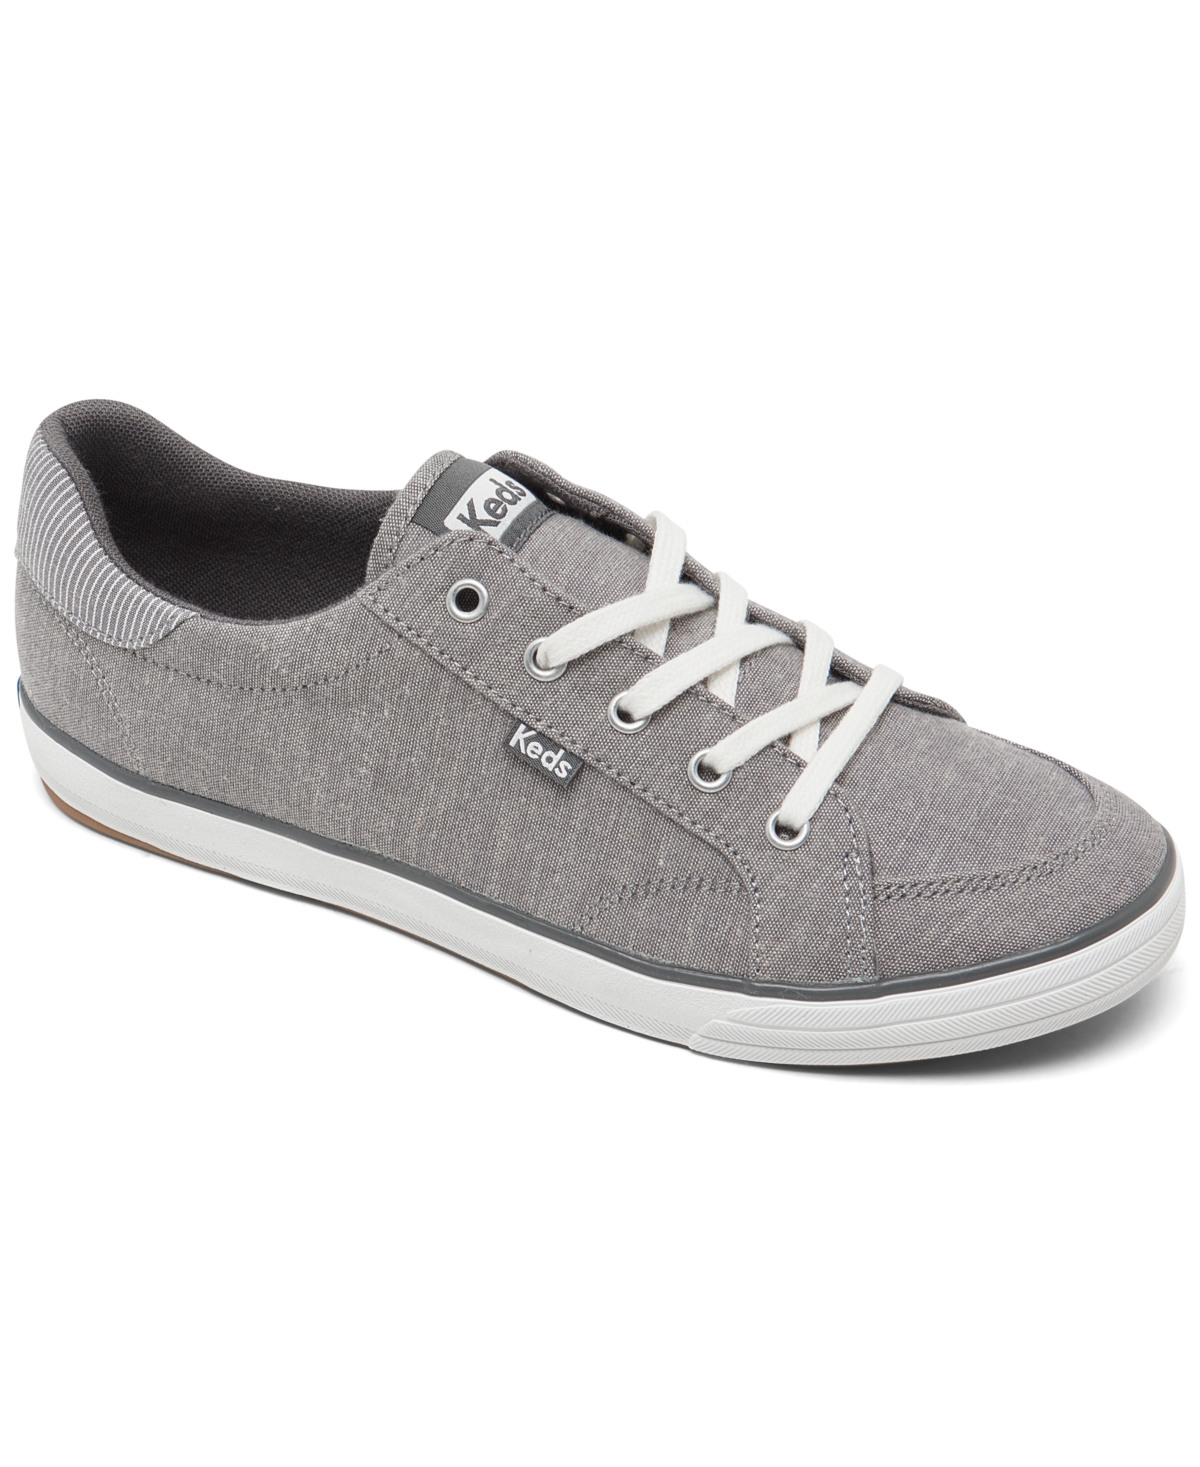 Keds Women's Center Iii Chambray Casual Sneakers from Finish Line